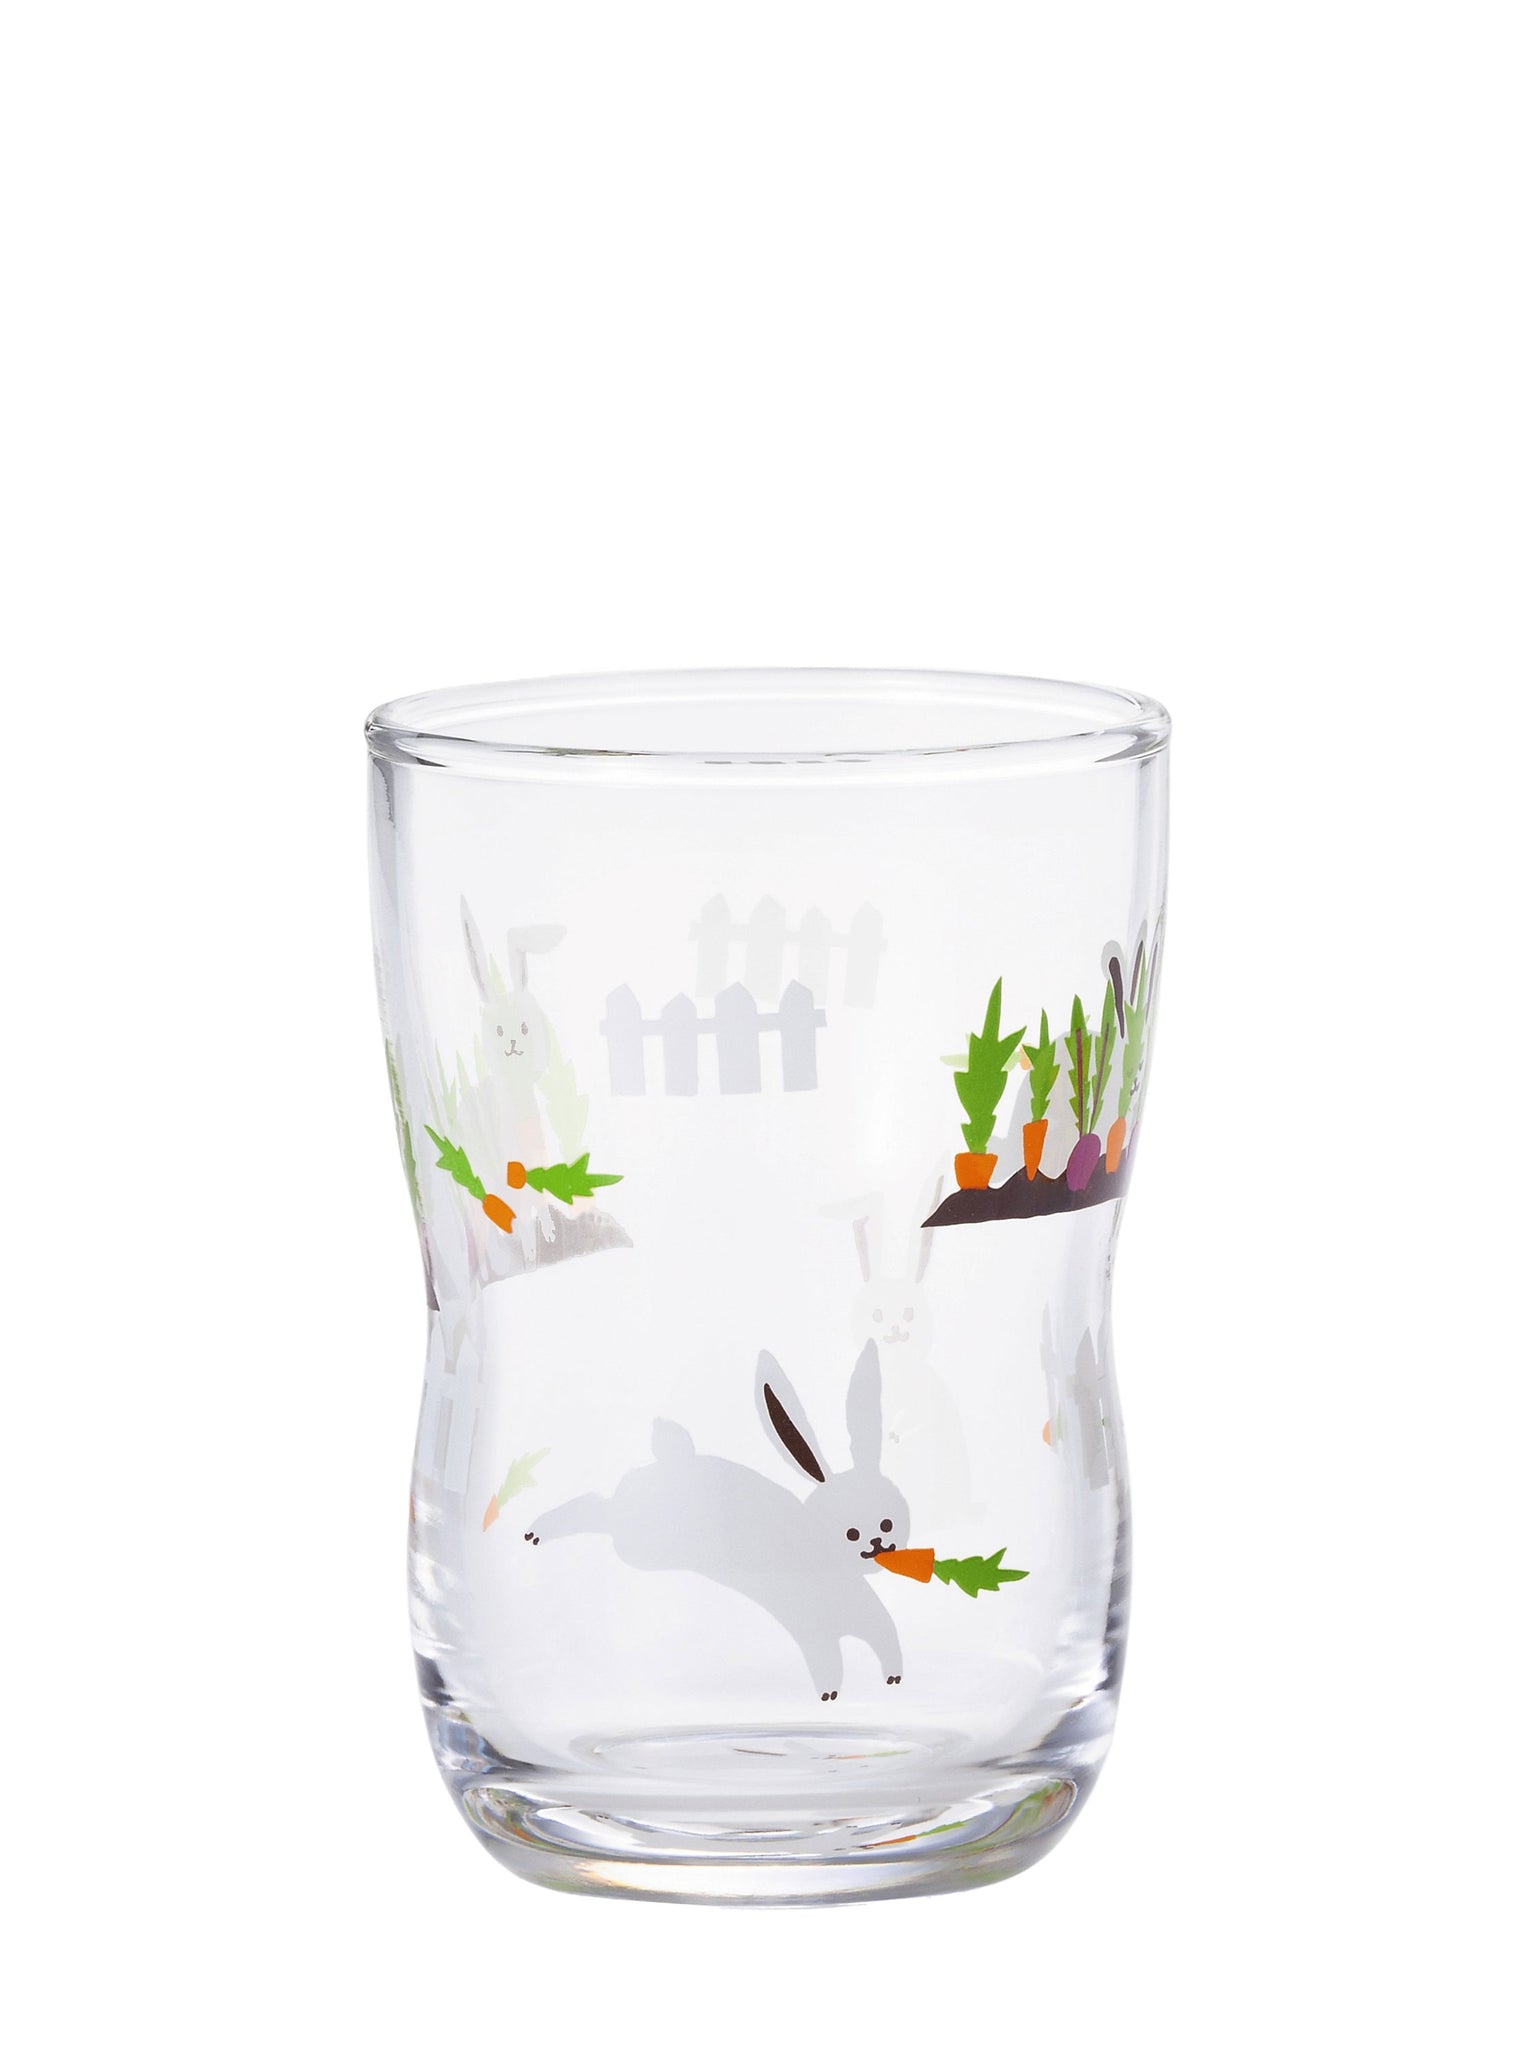 Kids tumbler glass japanese with rabbits